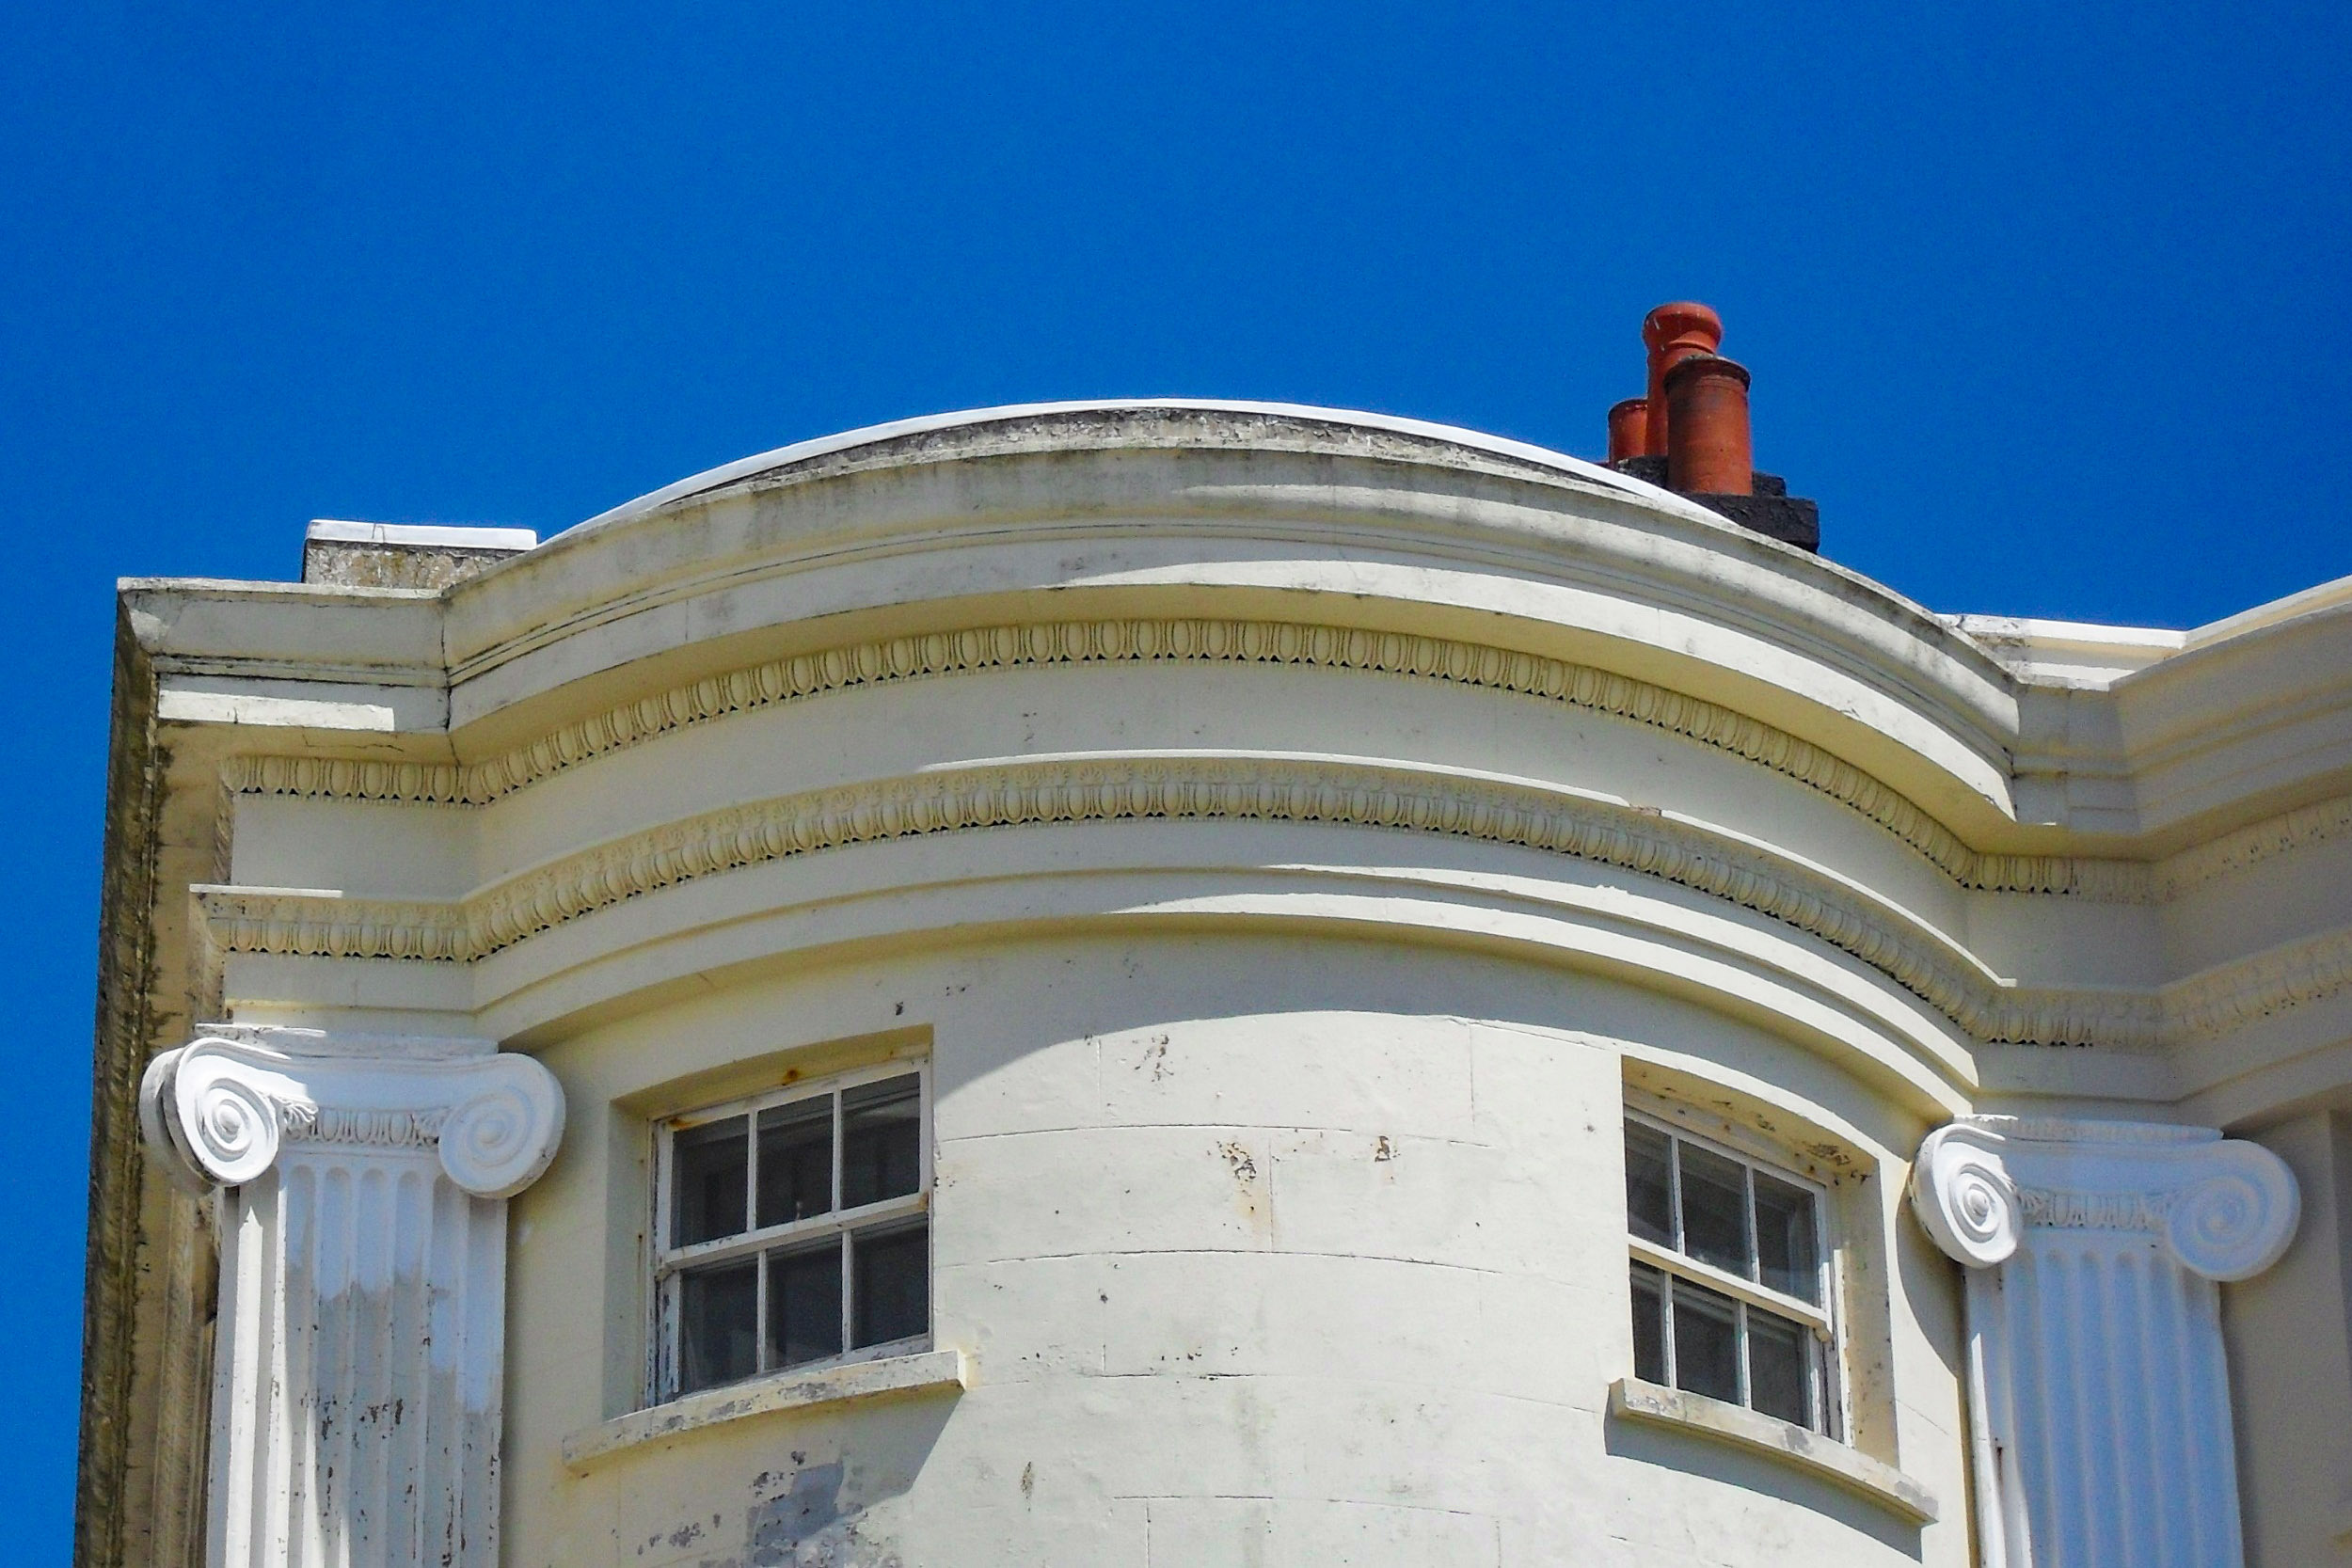 102 Marine Parade Brighton. Photo by The Voice of Hassocks - licence [CC0] from Wikimedia Commons